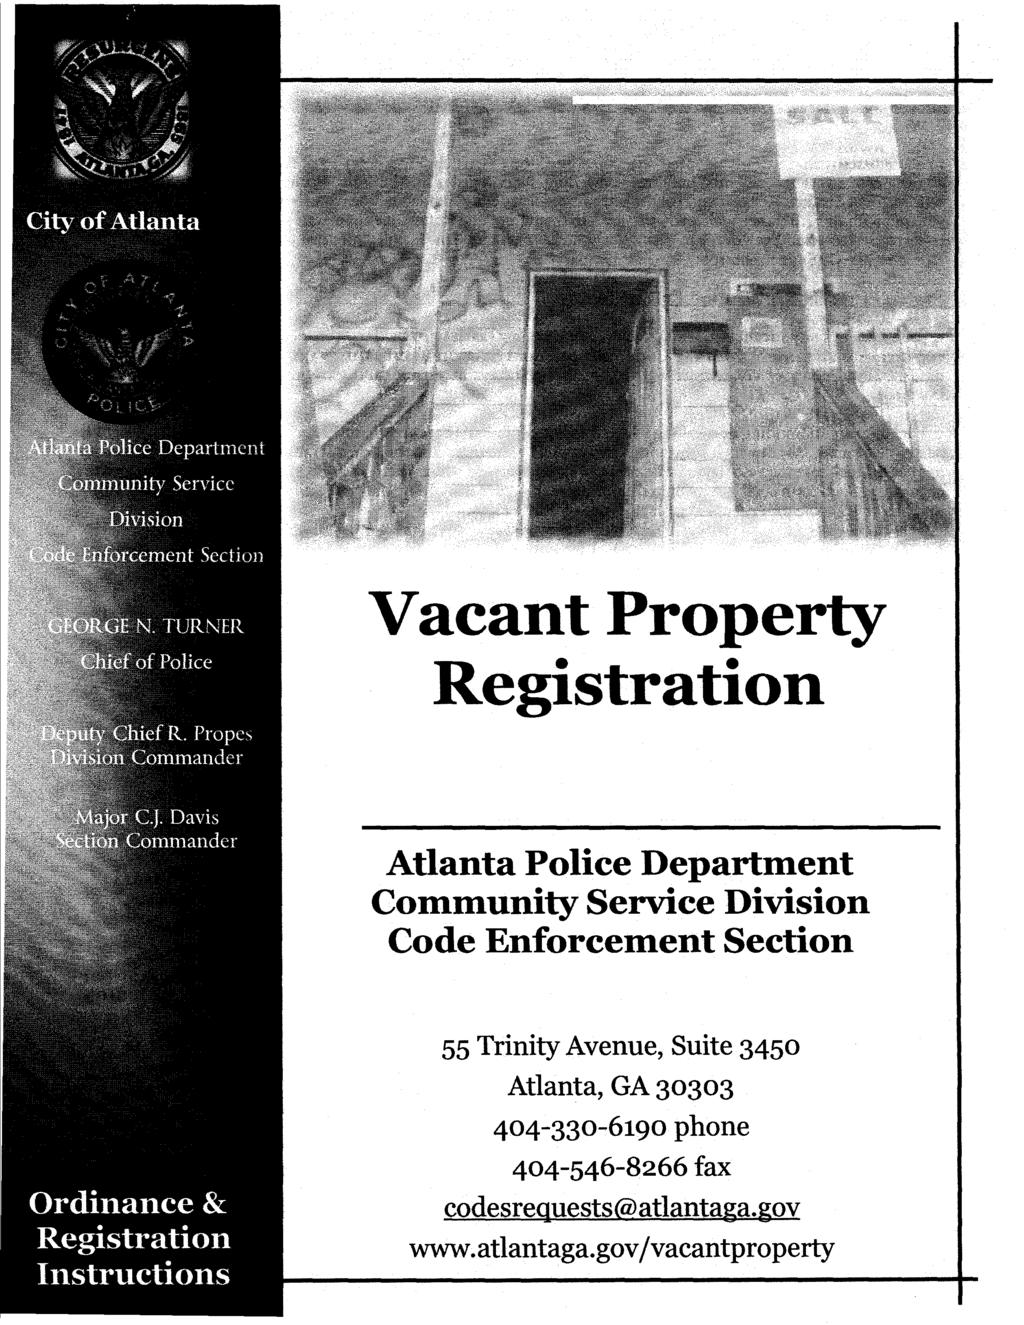 Vacant Property Registration Atlanta Police Department Community Service Division Code Enforcement Section 55 Trinity Avenue,